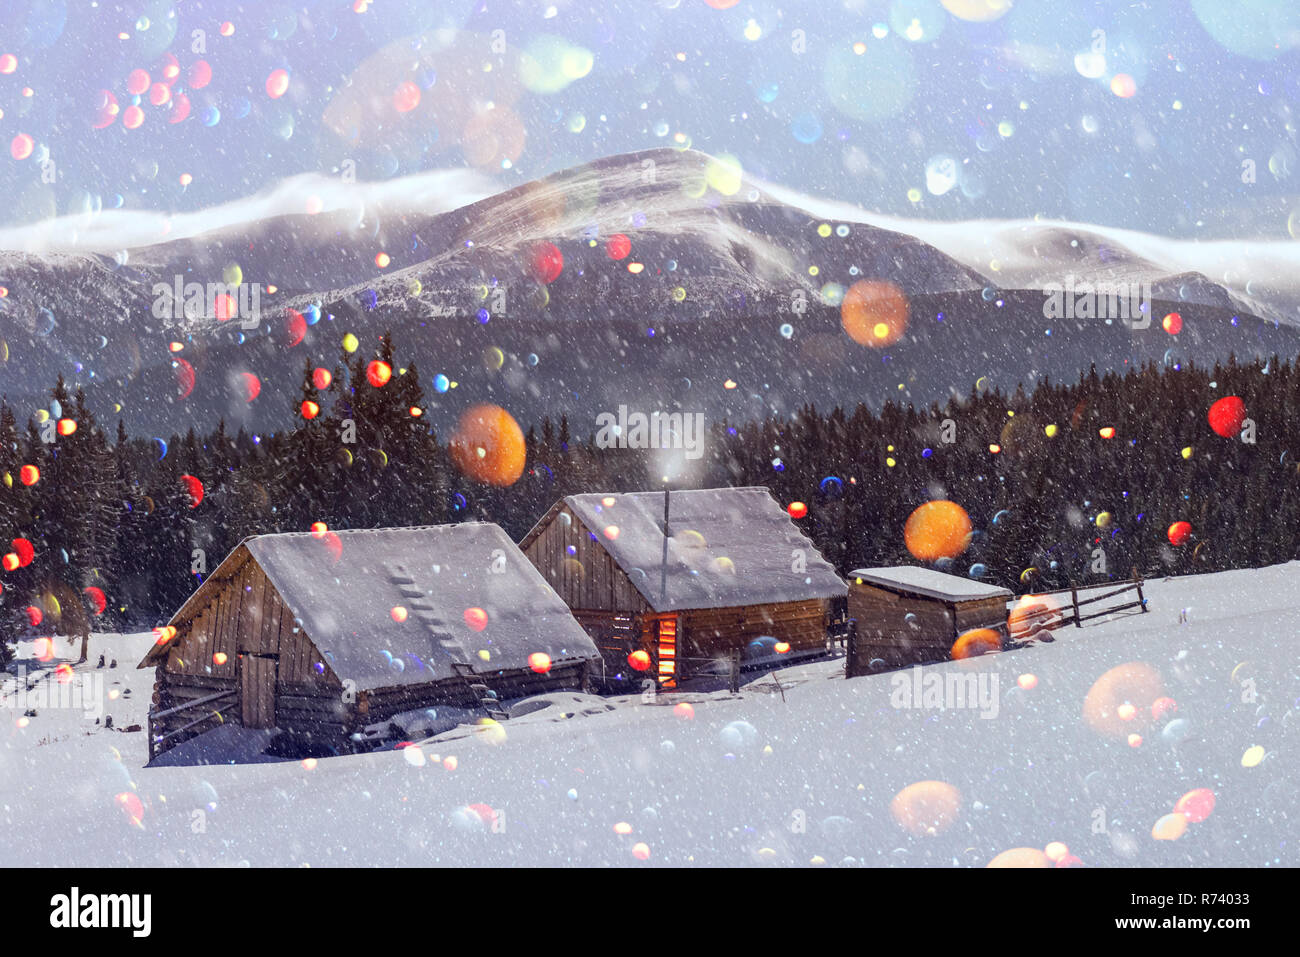 Fantastic night landscape glowing by moon light. Dramatic wintry scene with snowy house. Christmas holiday postcard collage. DOF bokeh light postprocessing effect Stock Photo